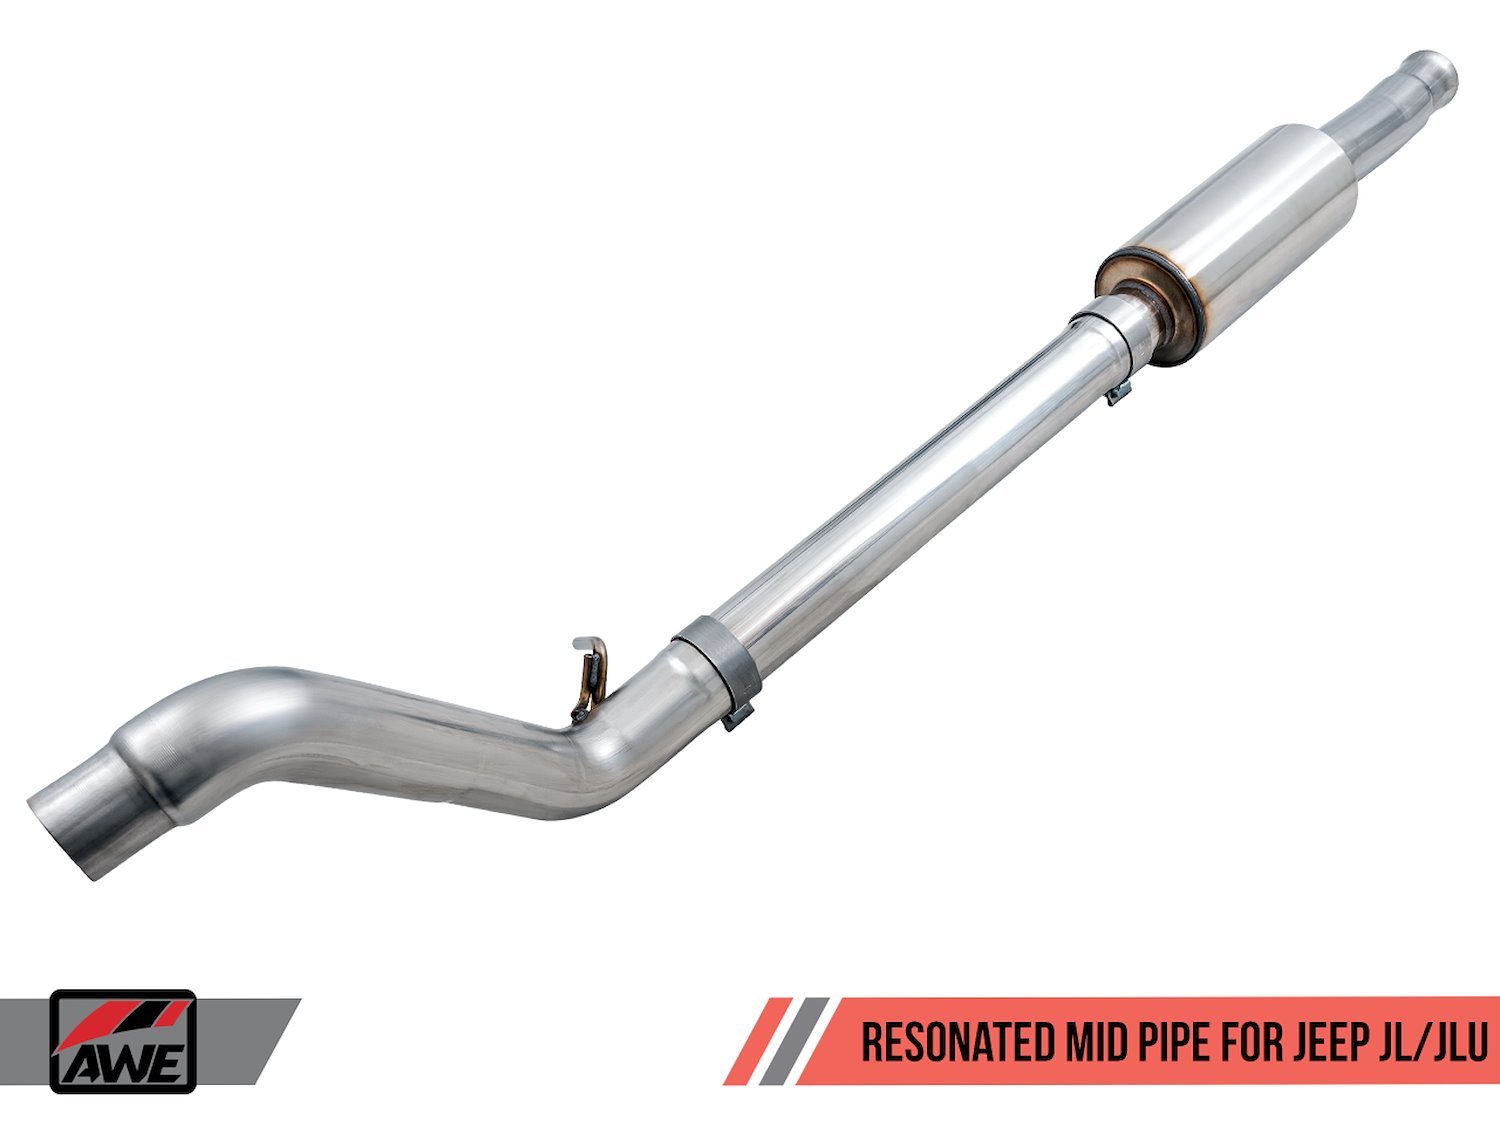 Resonated Mid Pipe for Jeep JL/JLU 3.6L